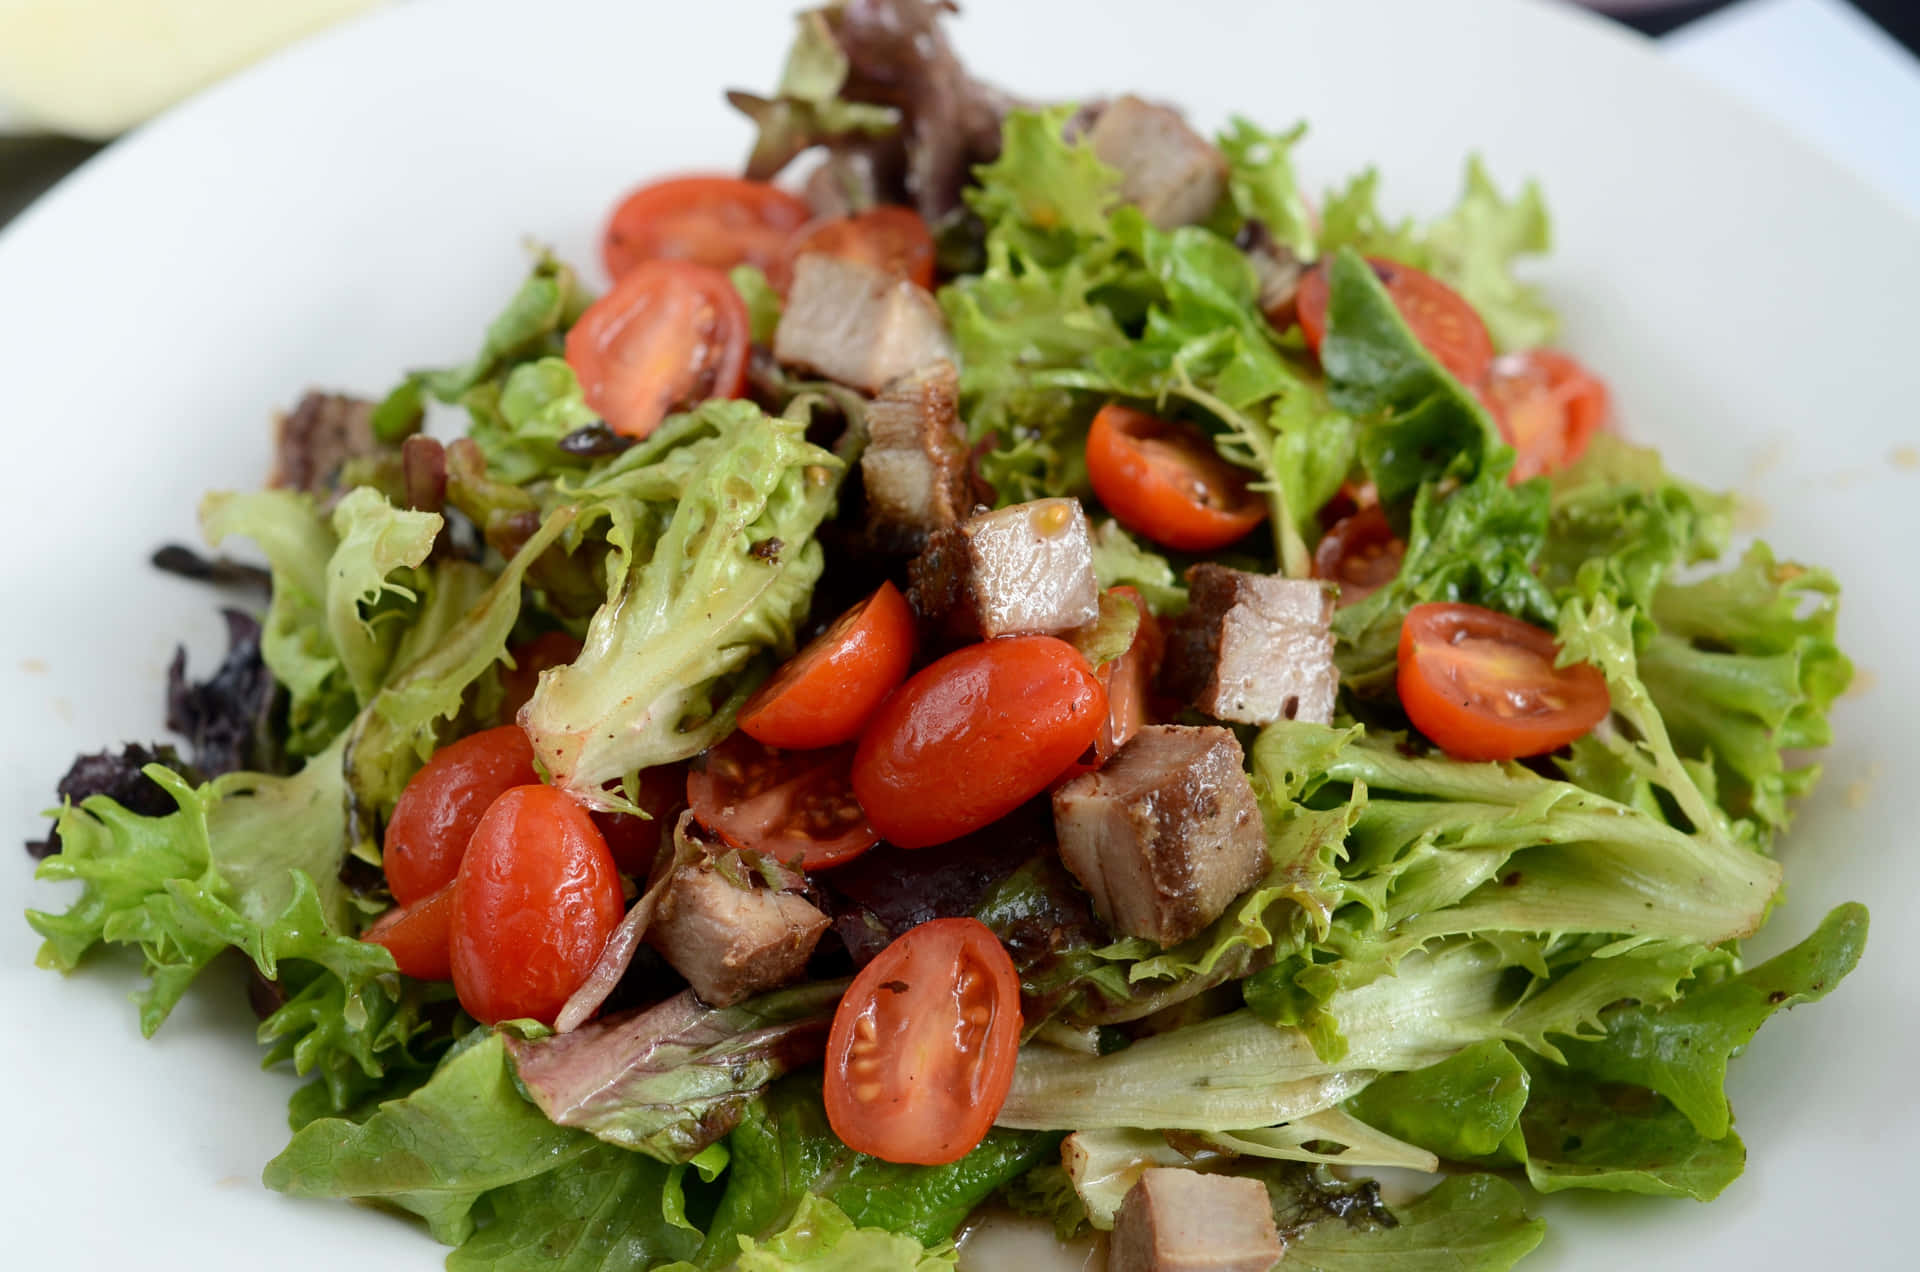 Enjoy this fresh and delicious salad!